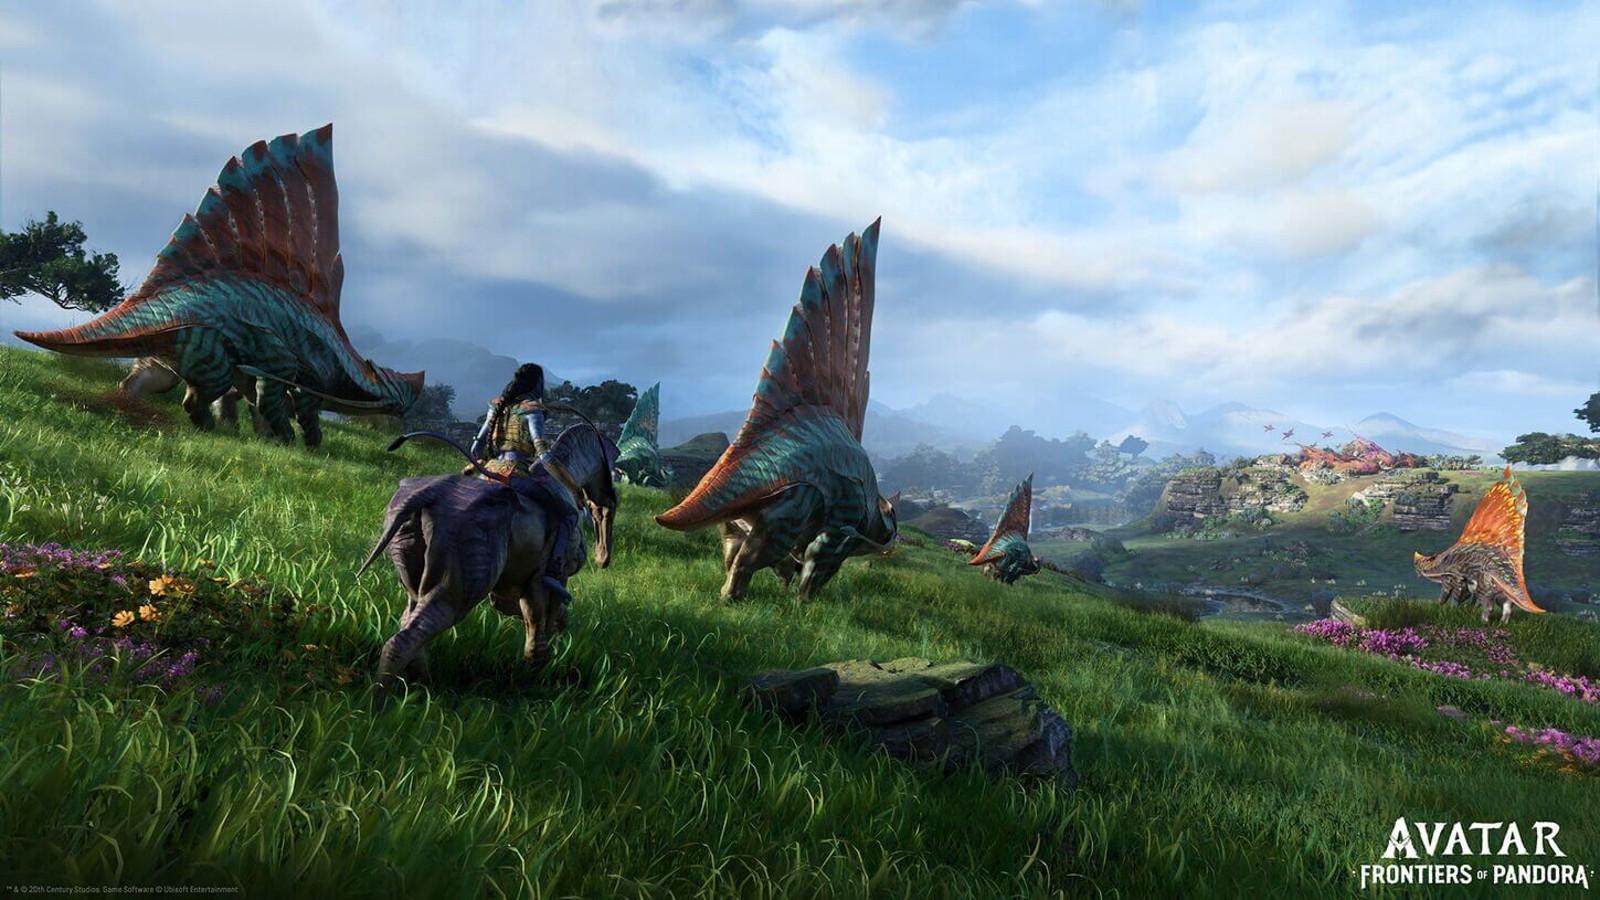 An image from Avatar: Frontiers of Pandora featuring a Na'vi in a vast green landscape.